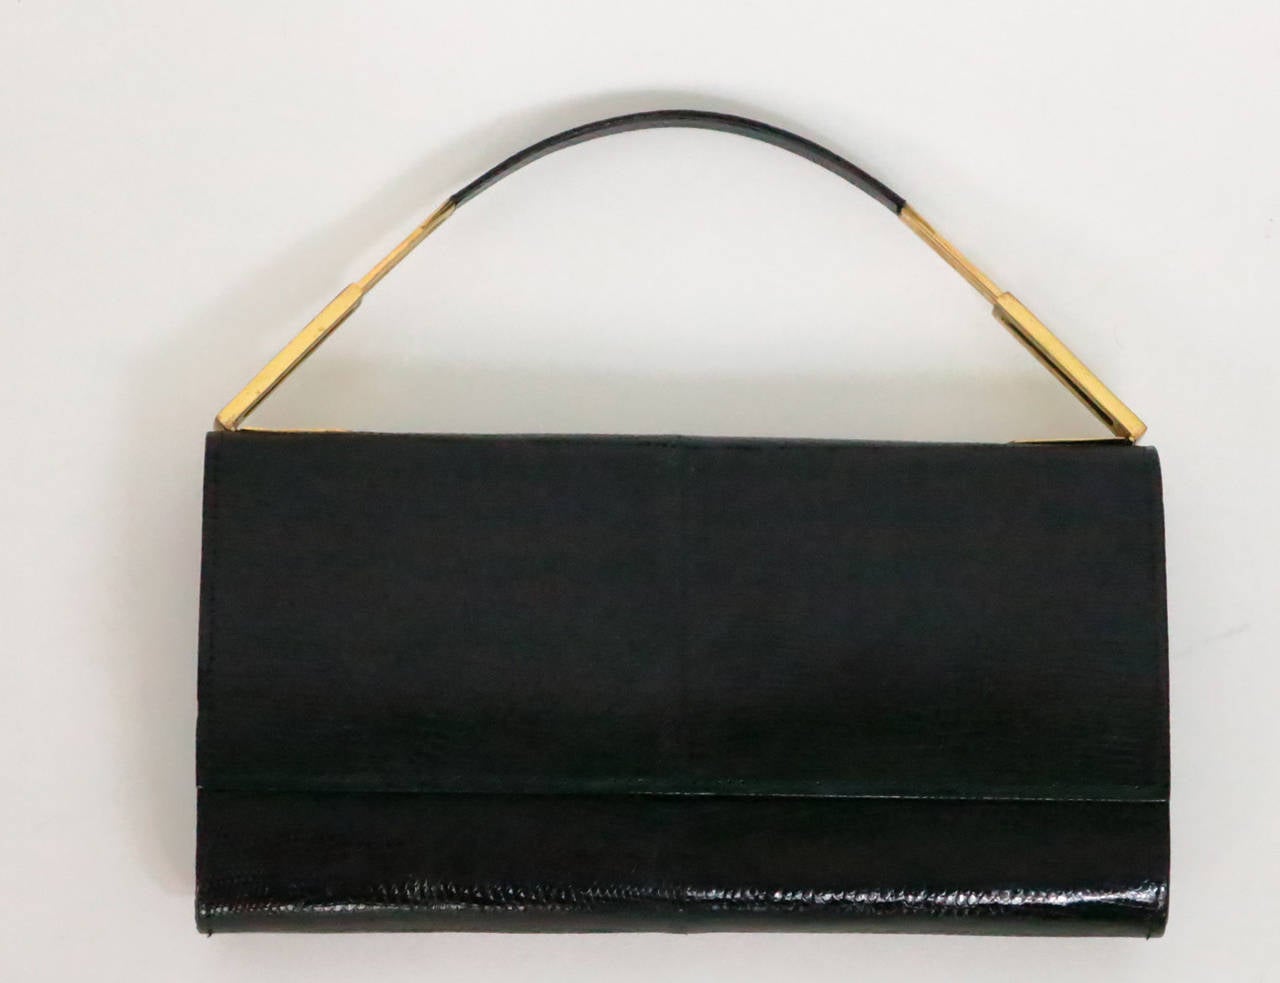 Glazed black lizard handbag/clutch from the 1970s…Flap closure bag has gold plated hardware and a retractable lizard handle, the bag is rounded at the bottom…Center flap snap closure…The interior is lined in tan suede with a single zipper